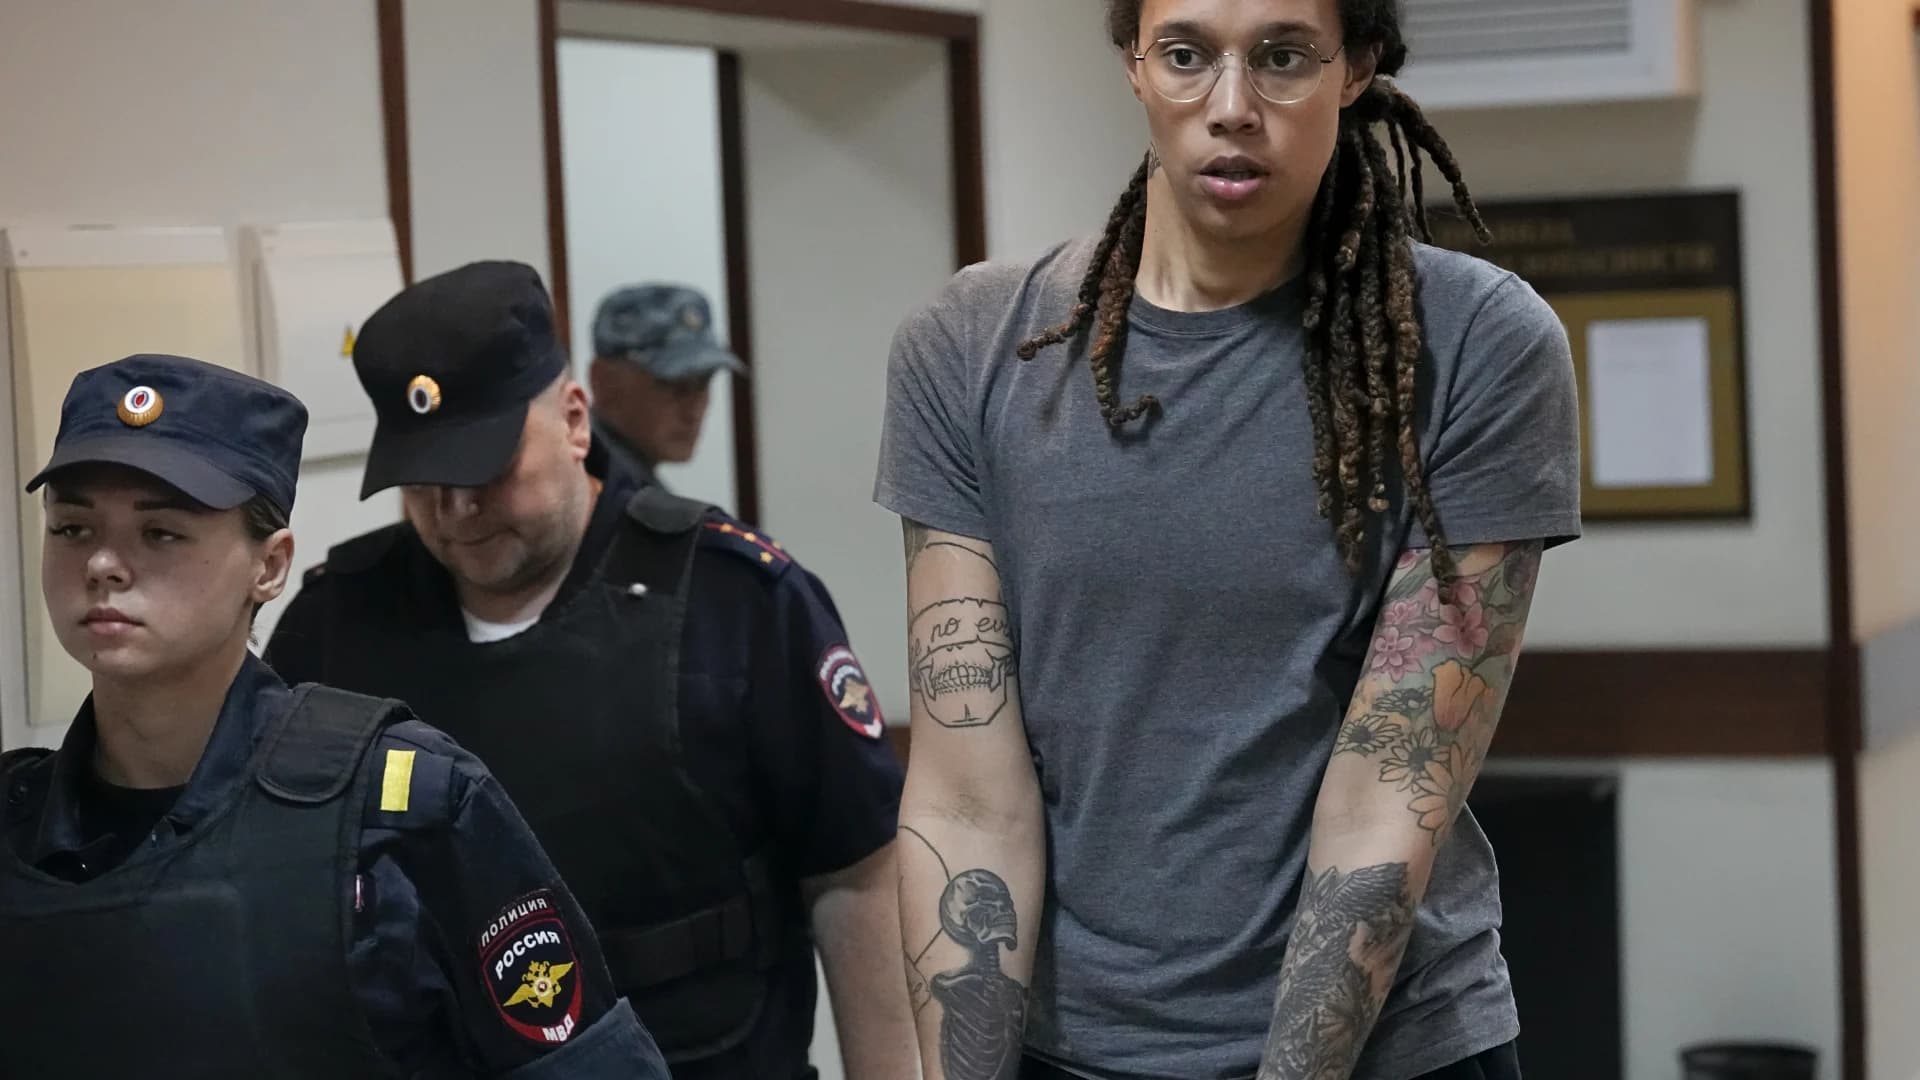 With Griner in jail, WNBA players skip Russia in offseason